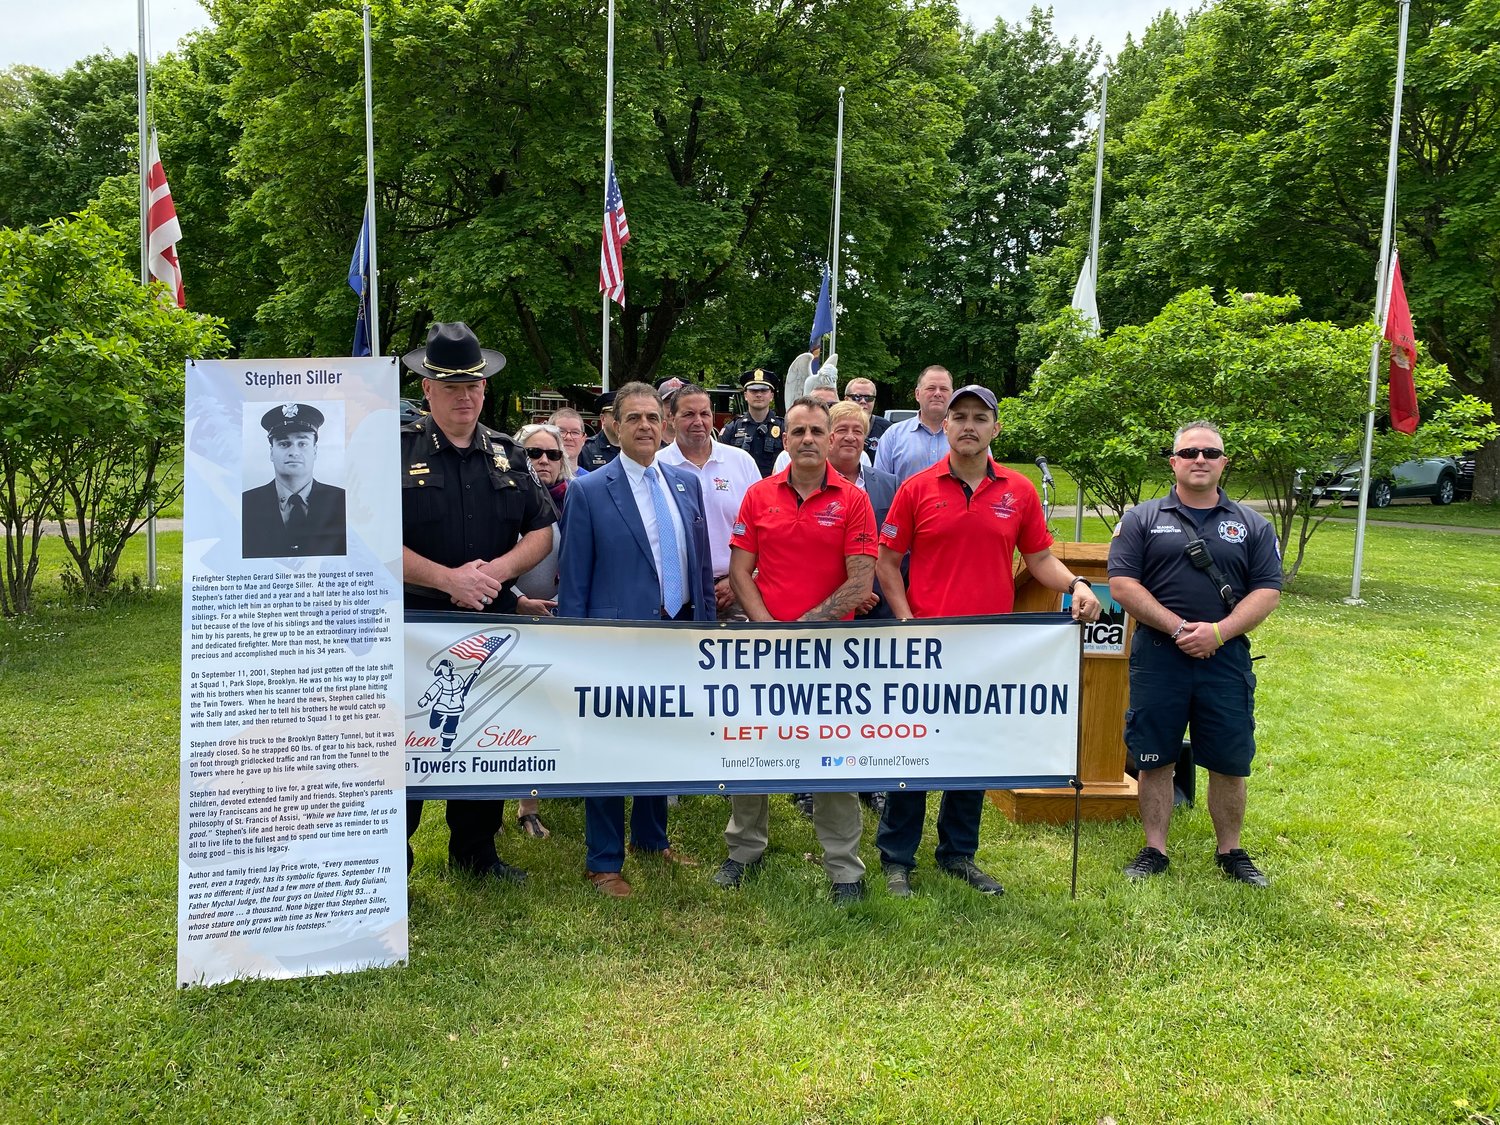 Local officials were on hand to mark the return of the Tunnel to Towers 5K Run and Walk.  From left: Oneida County Sheriff Robert Maciol, Utica Mayor Robert Palmieri, Tunnel to Towers Race Directors Phil Trzcinski and Alex Gonzalez, and other city and area representatives, event sponsors and various first responders.